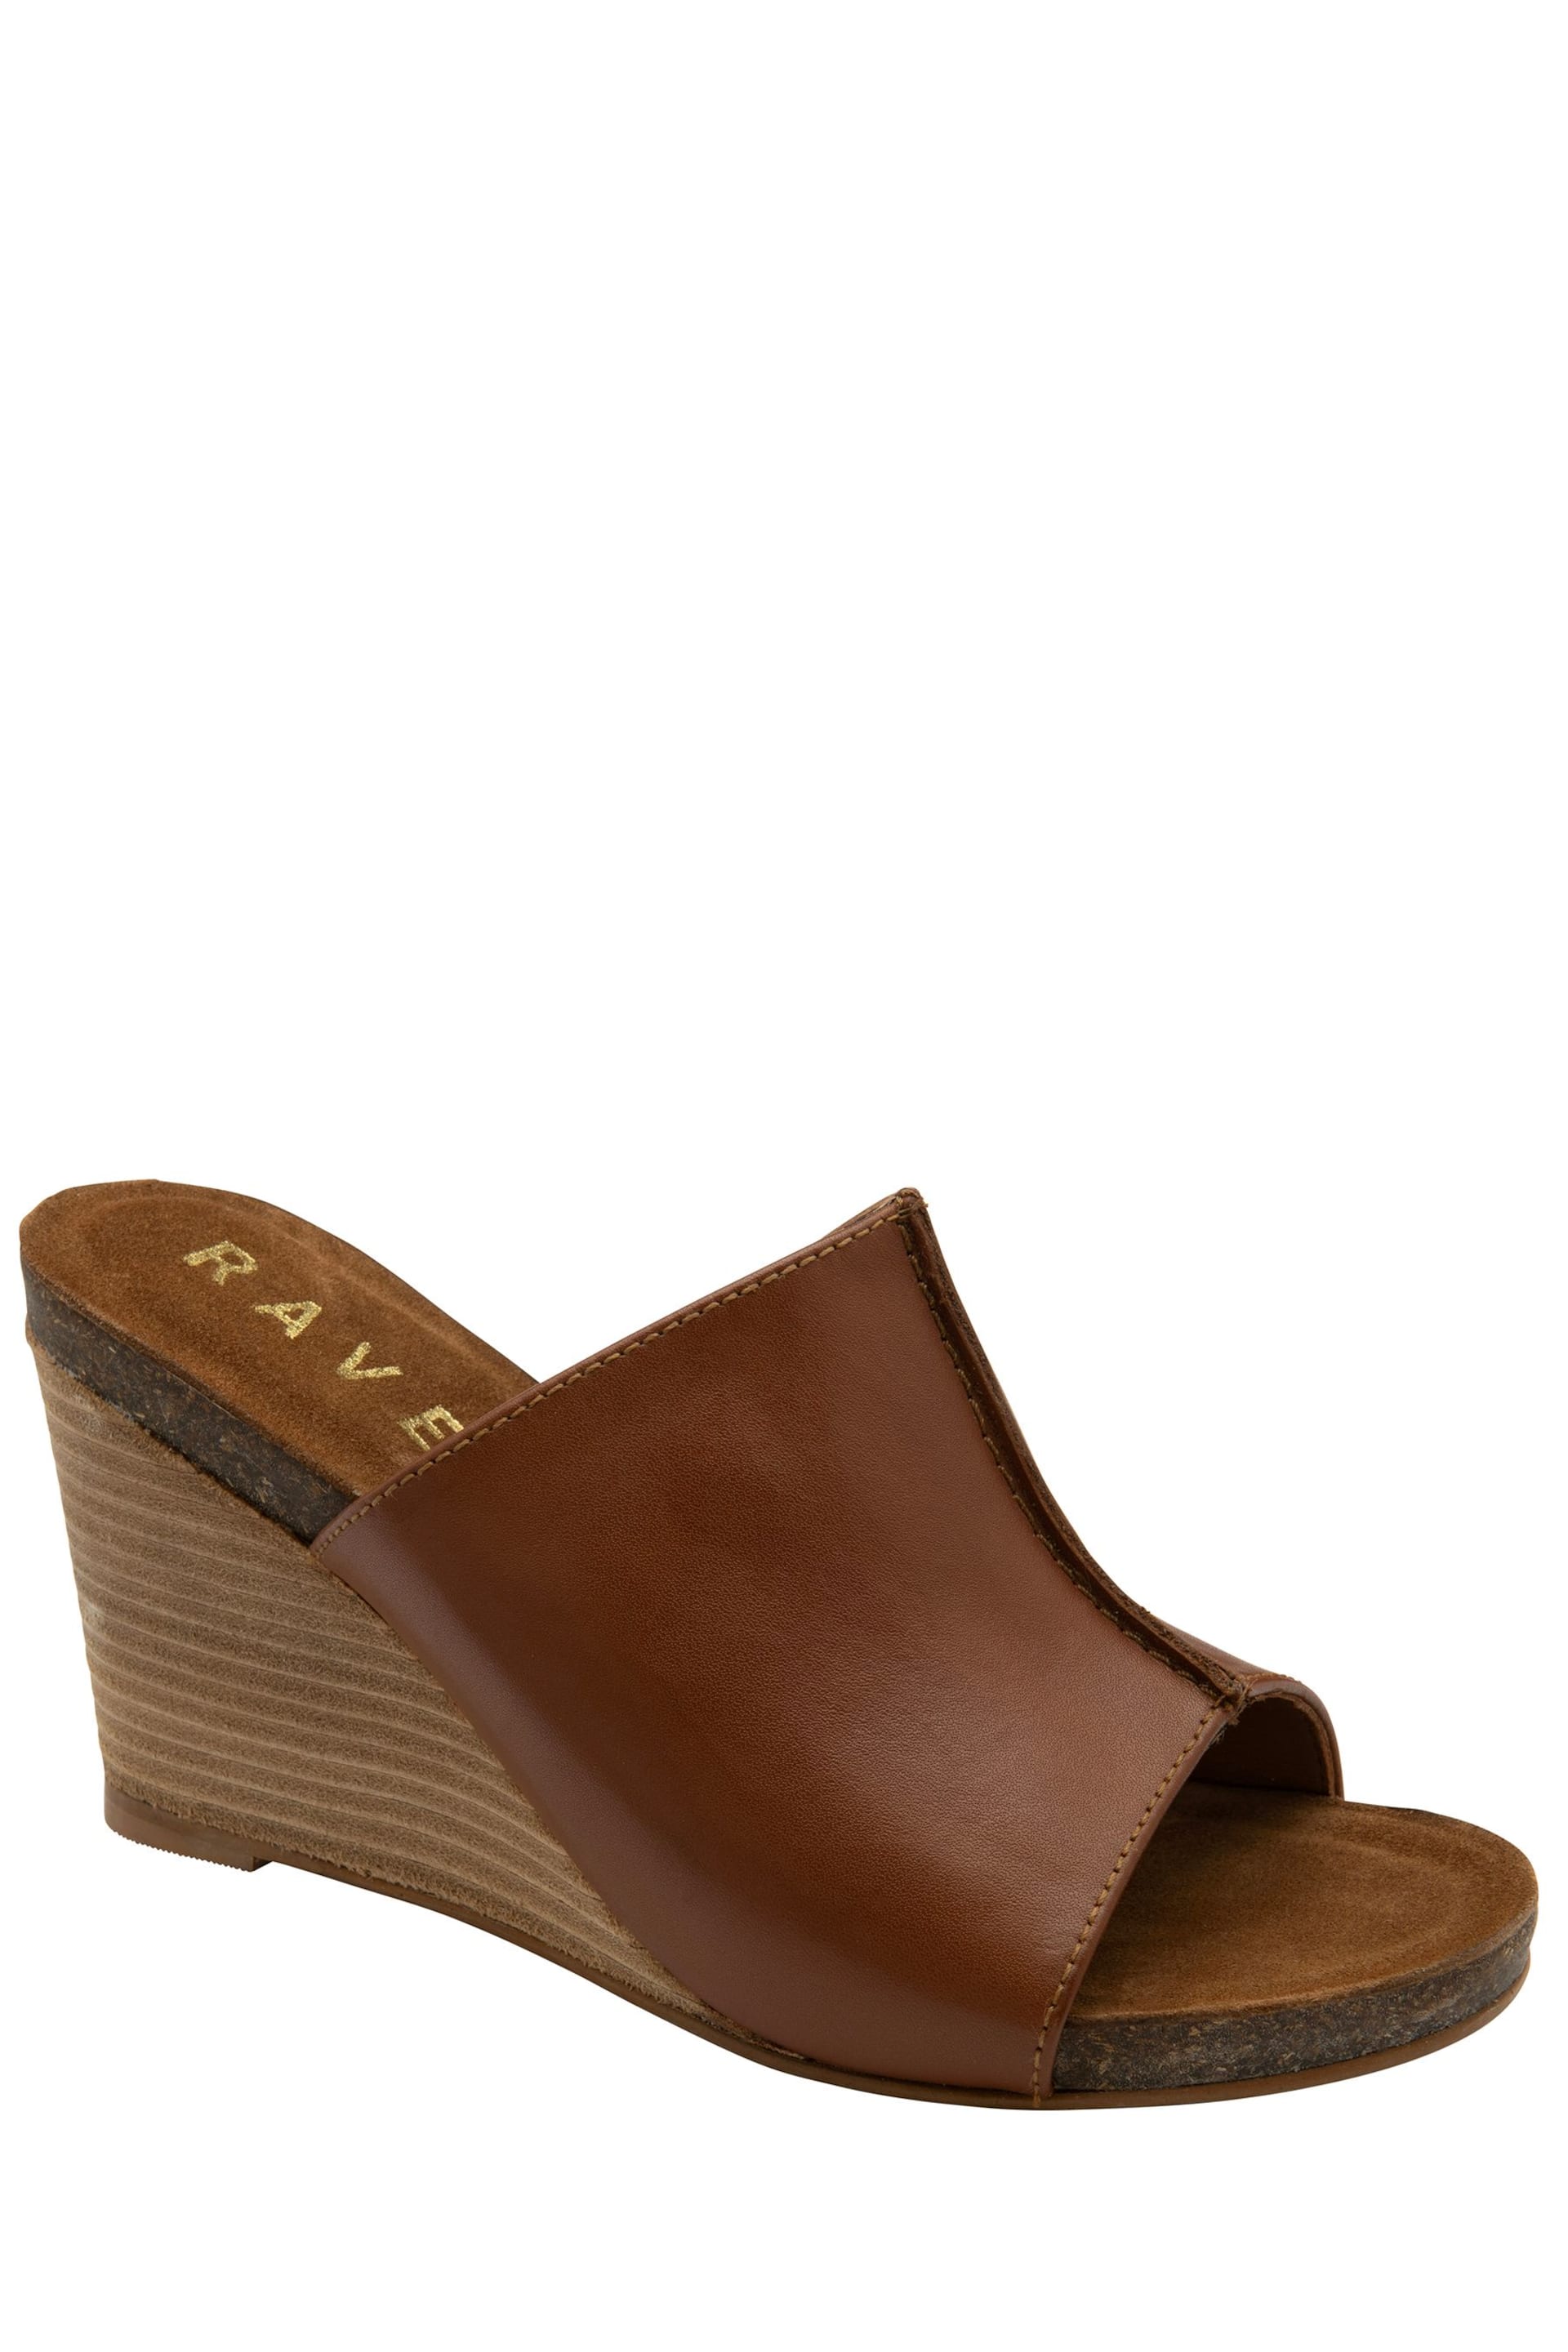 Ravel Brown Leather Wedge Mule Sandals - Image 1 of 4